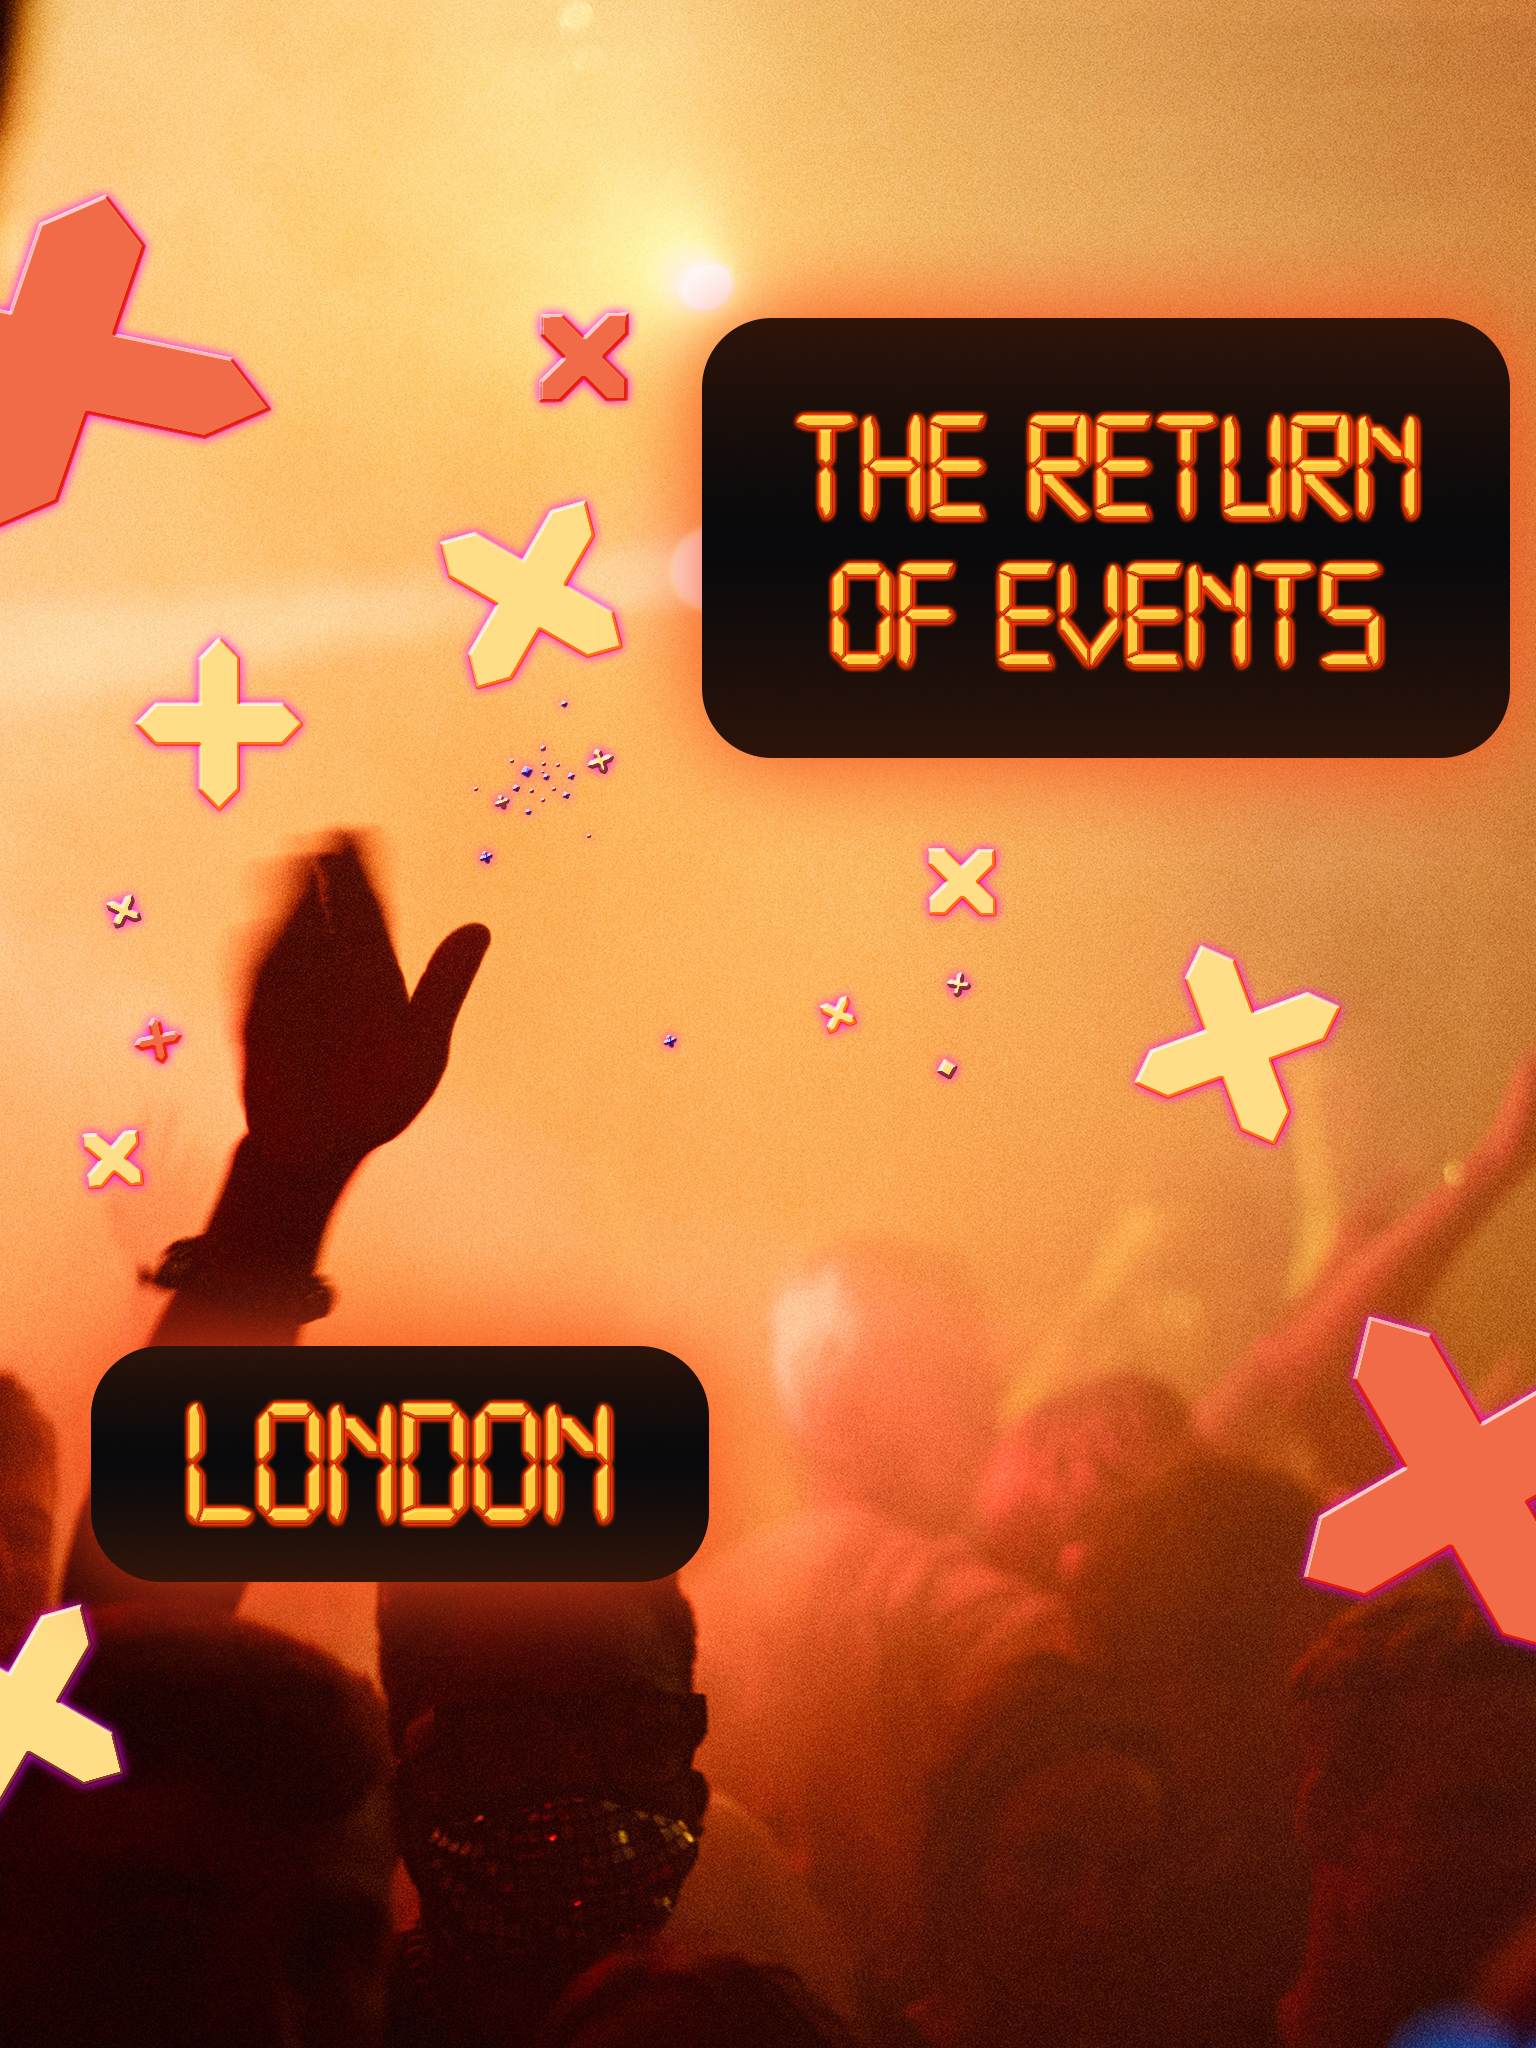 The Return of Events: London